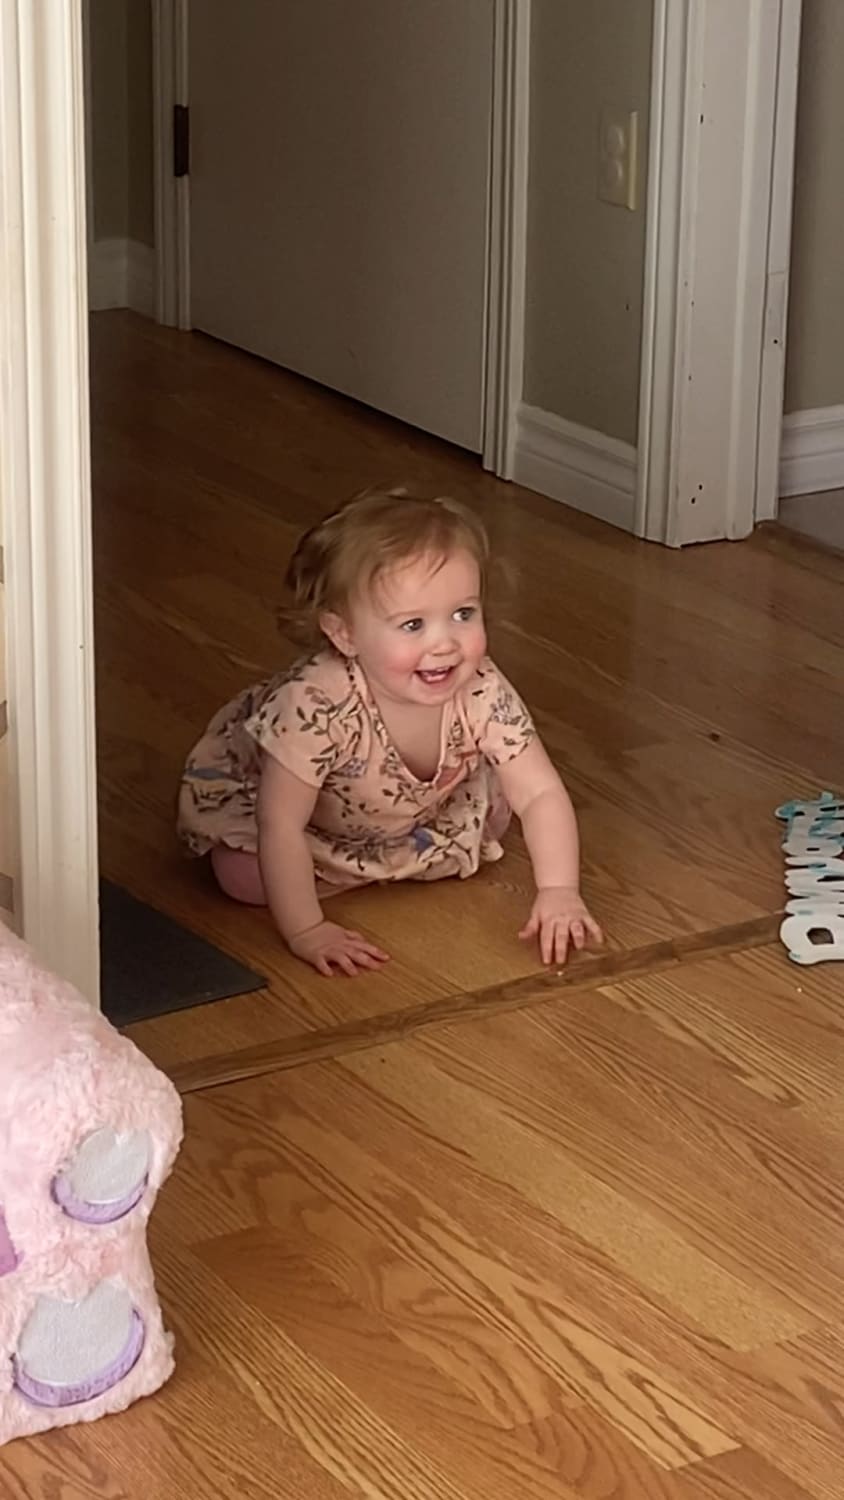 Just happen to catch our youngest daughters first steps on camera today and I haven’t stopped smiling since.